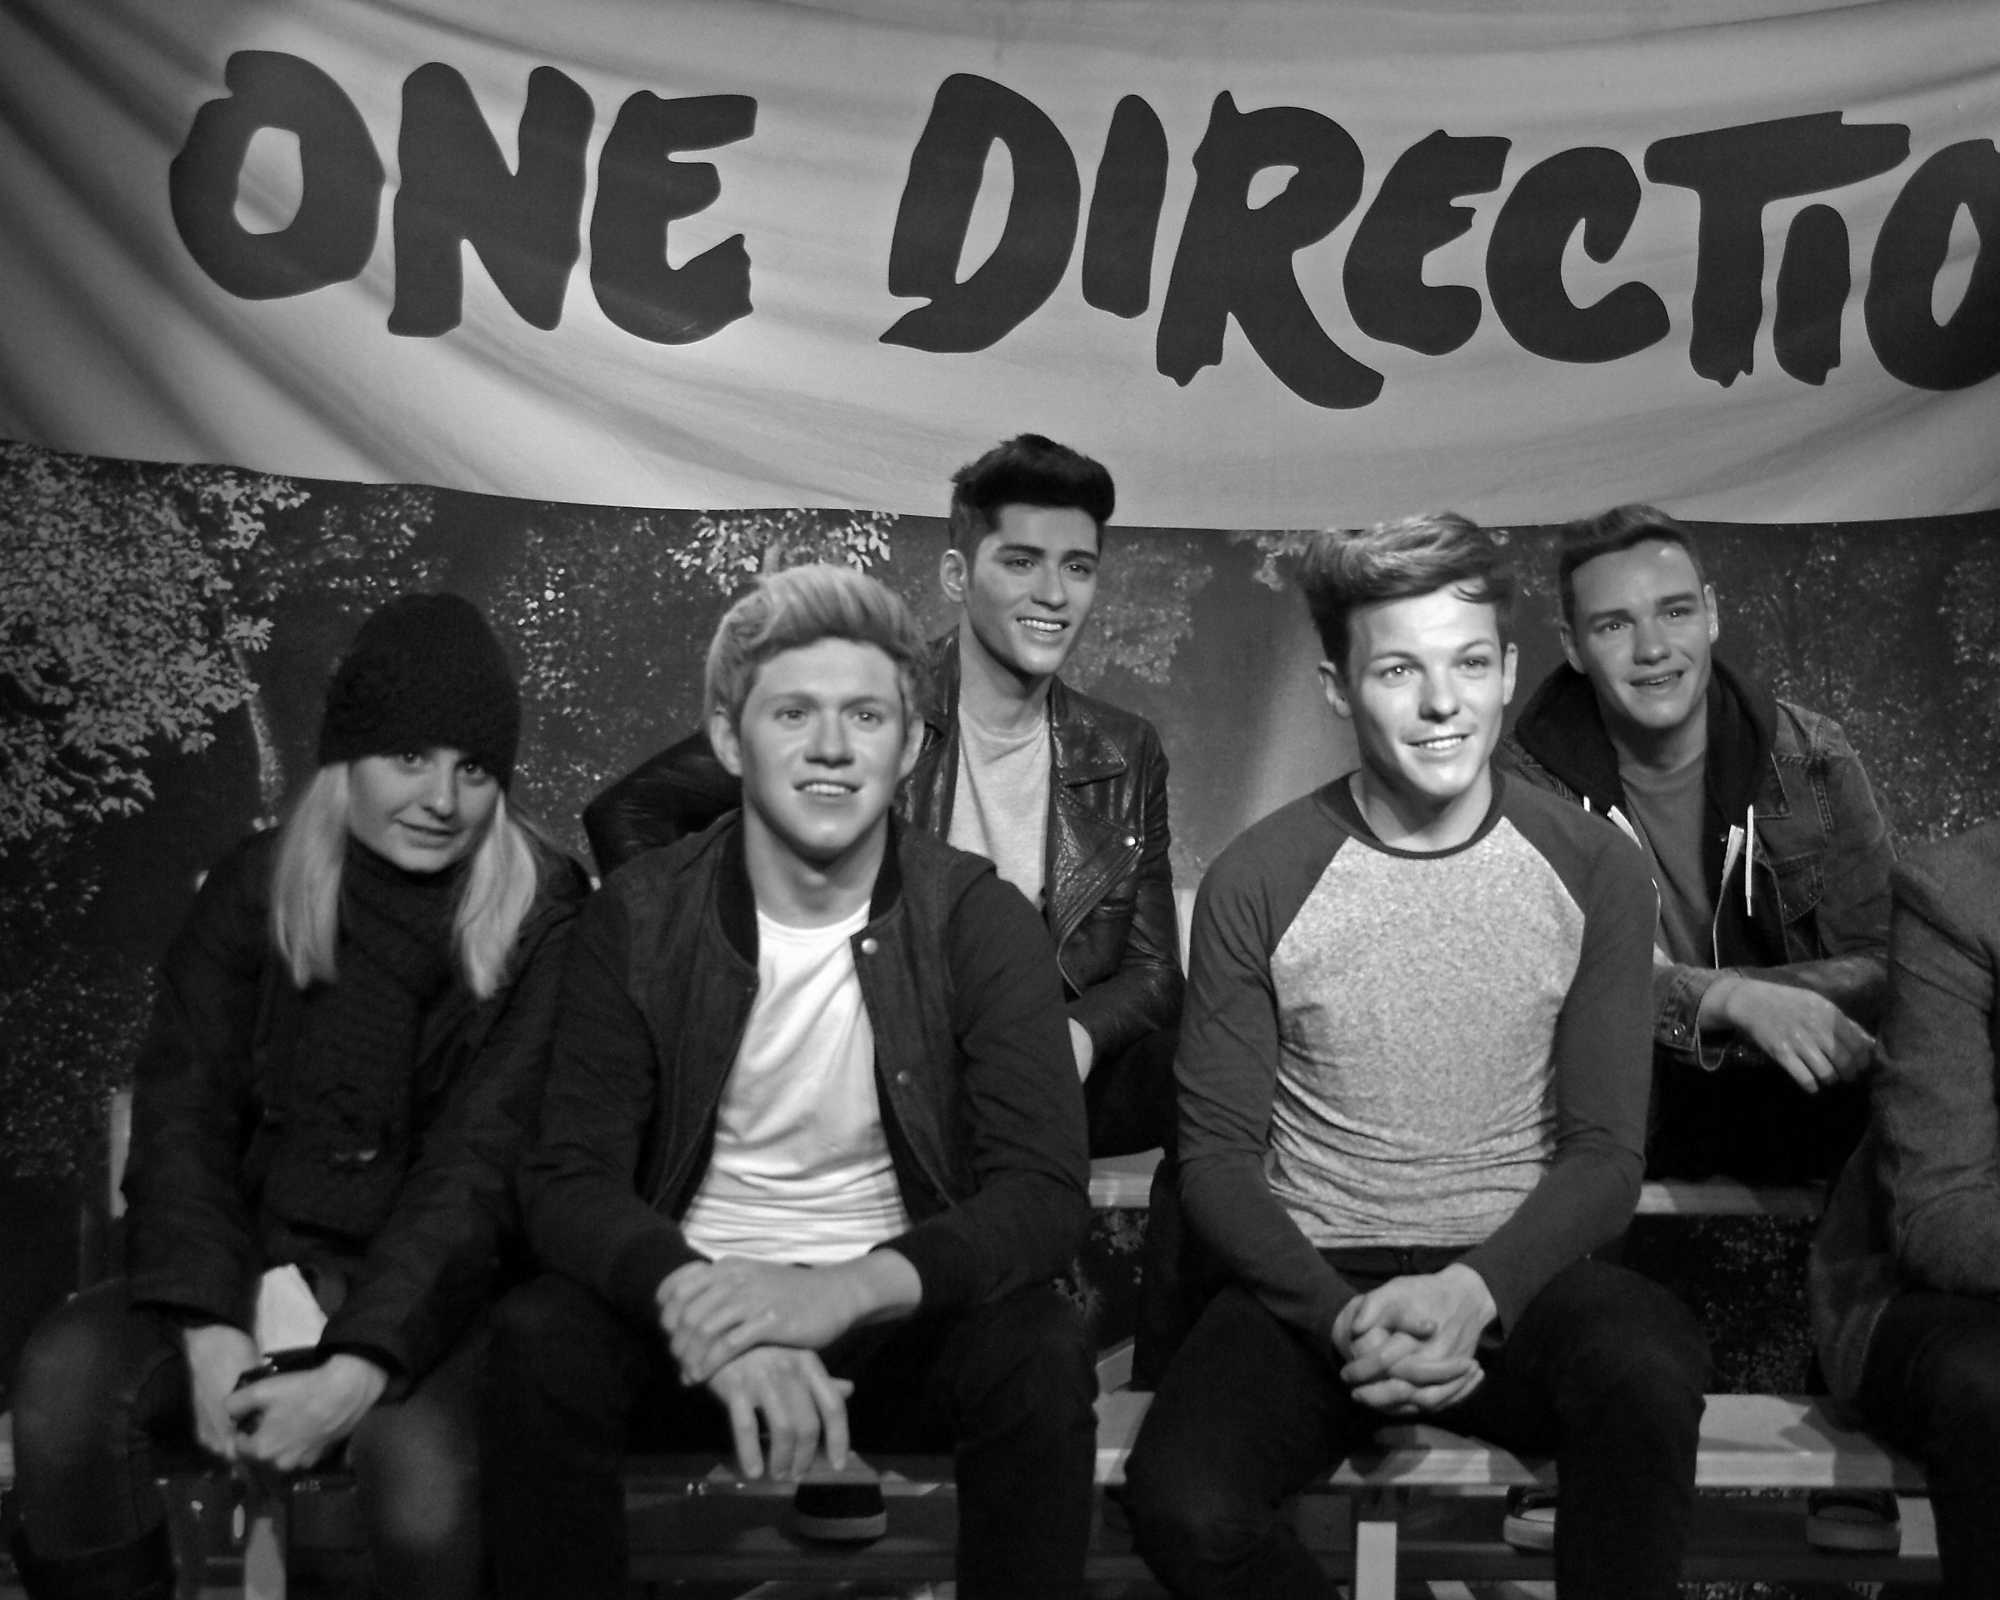 Lisa and One Direction